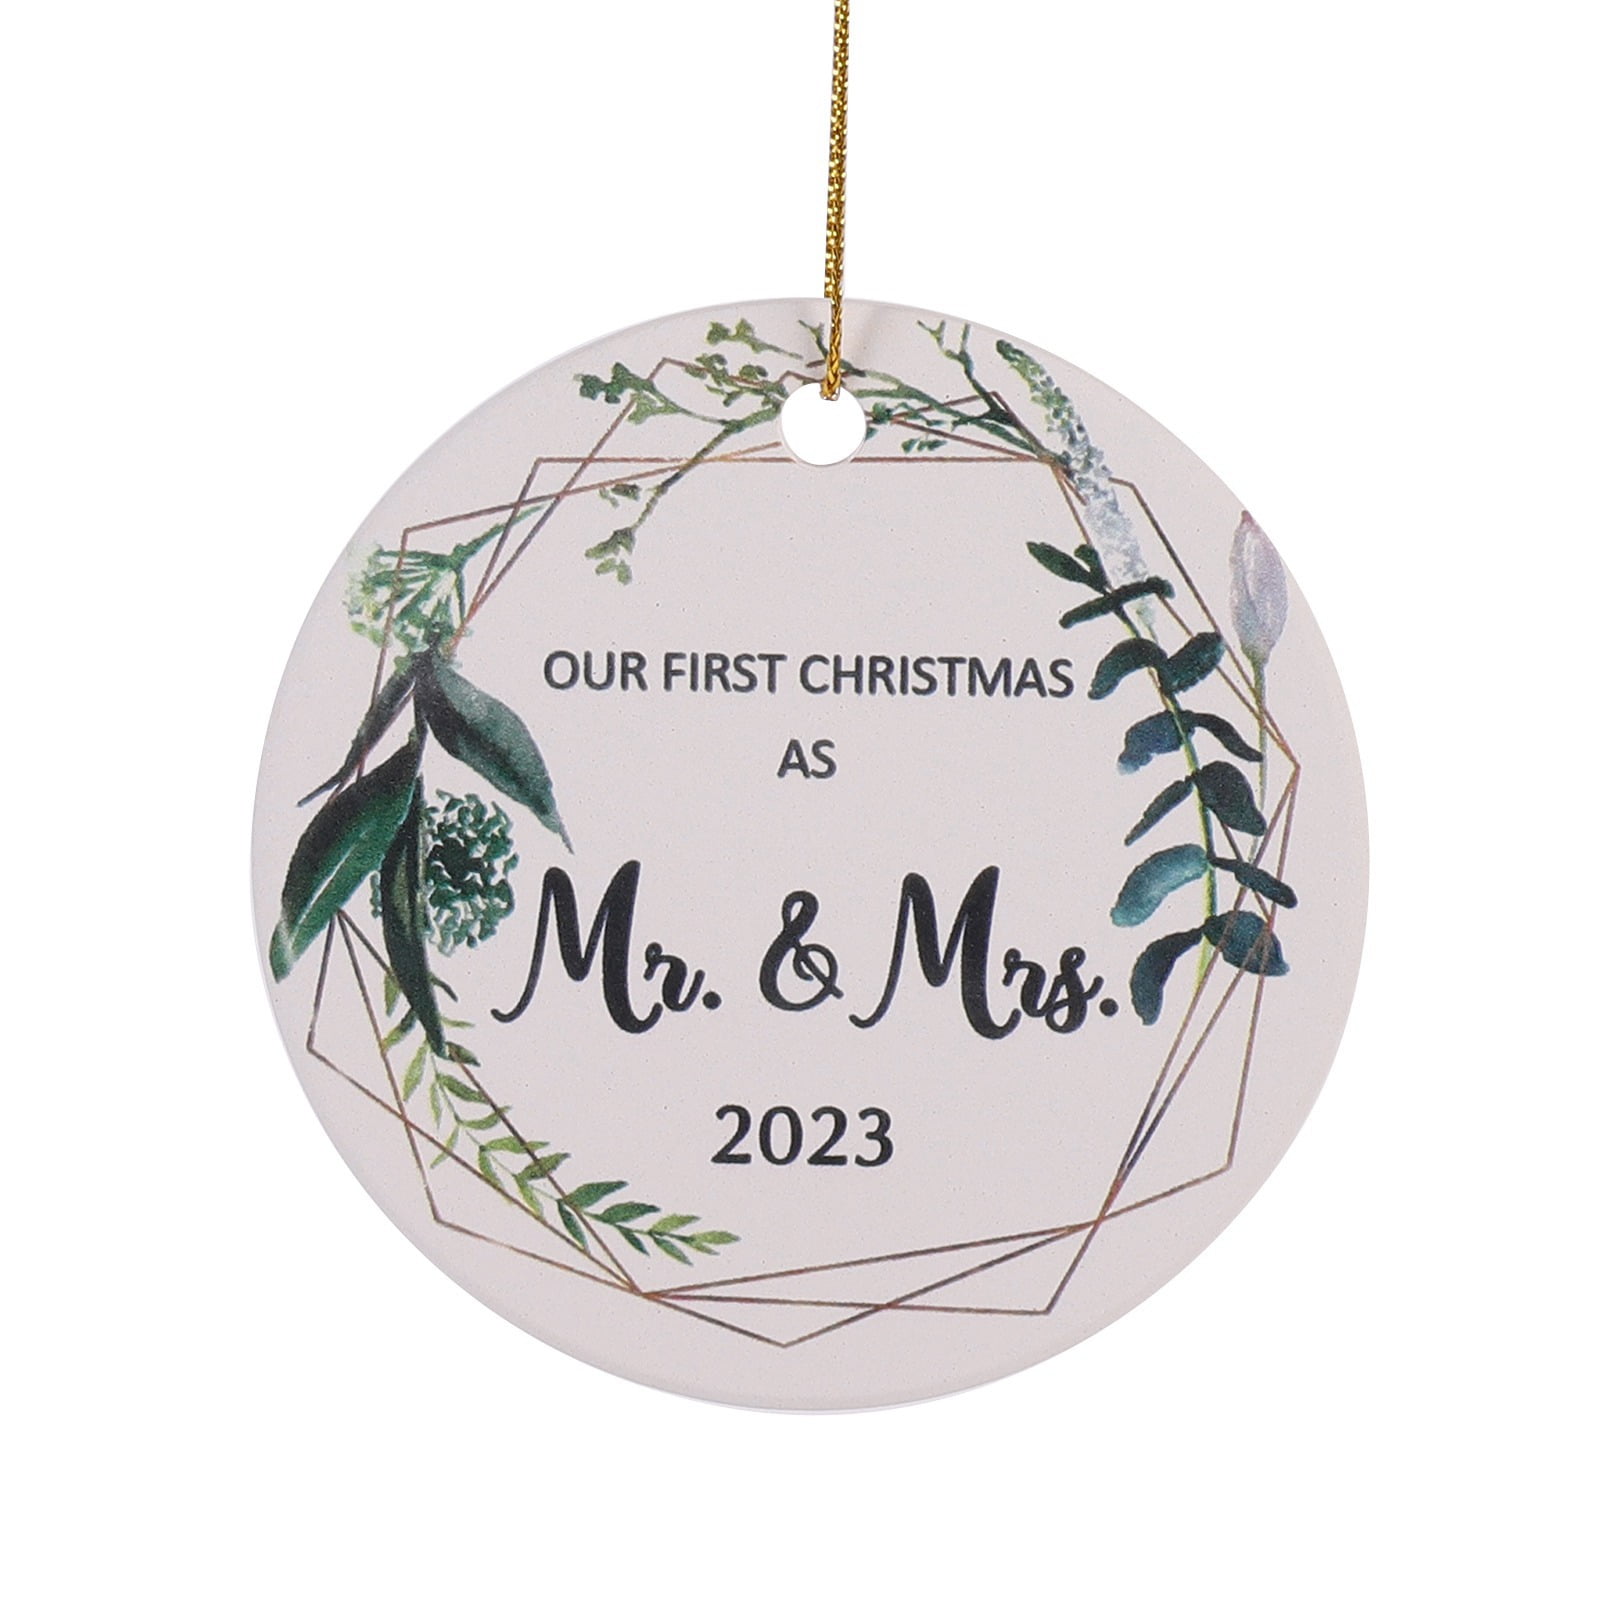 As Mr. & Mrs Christmas Ornament, Anniversary Present Gifts for Wife ...